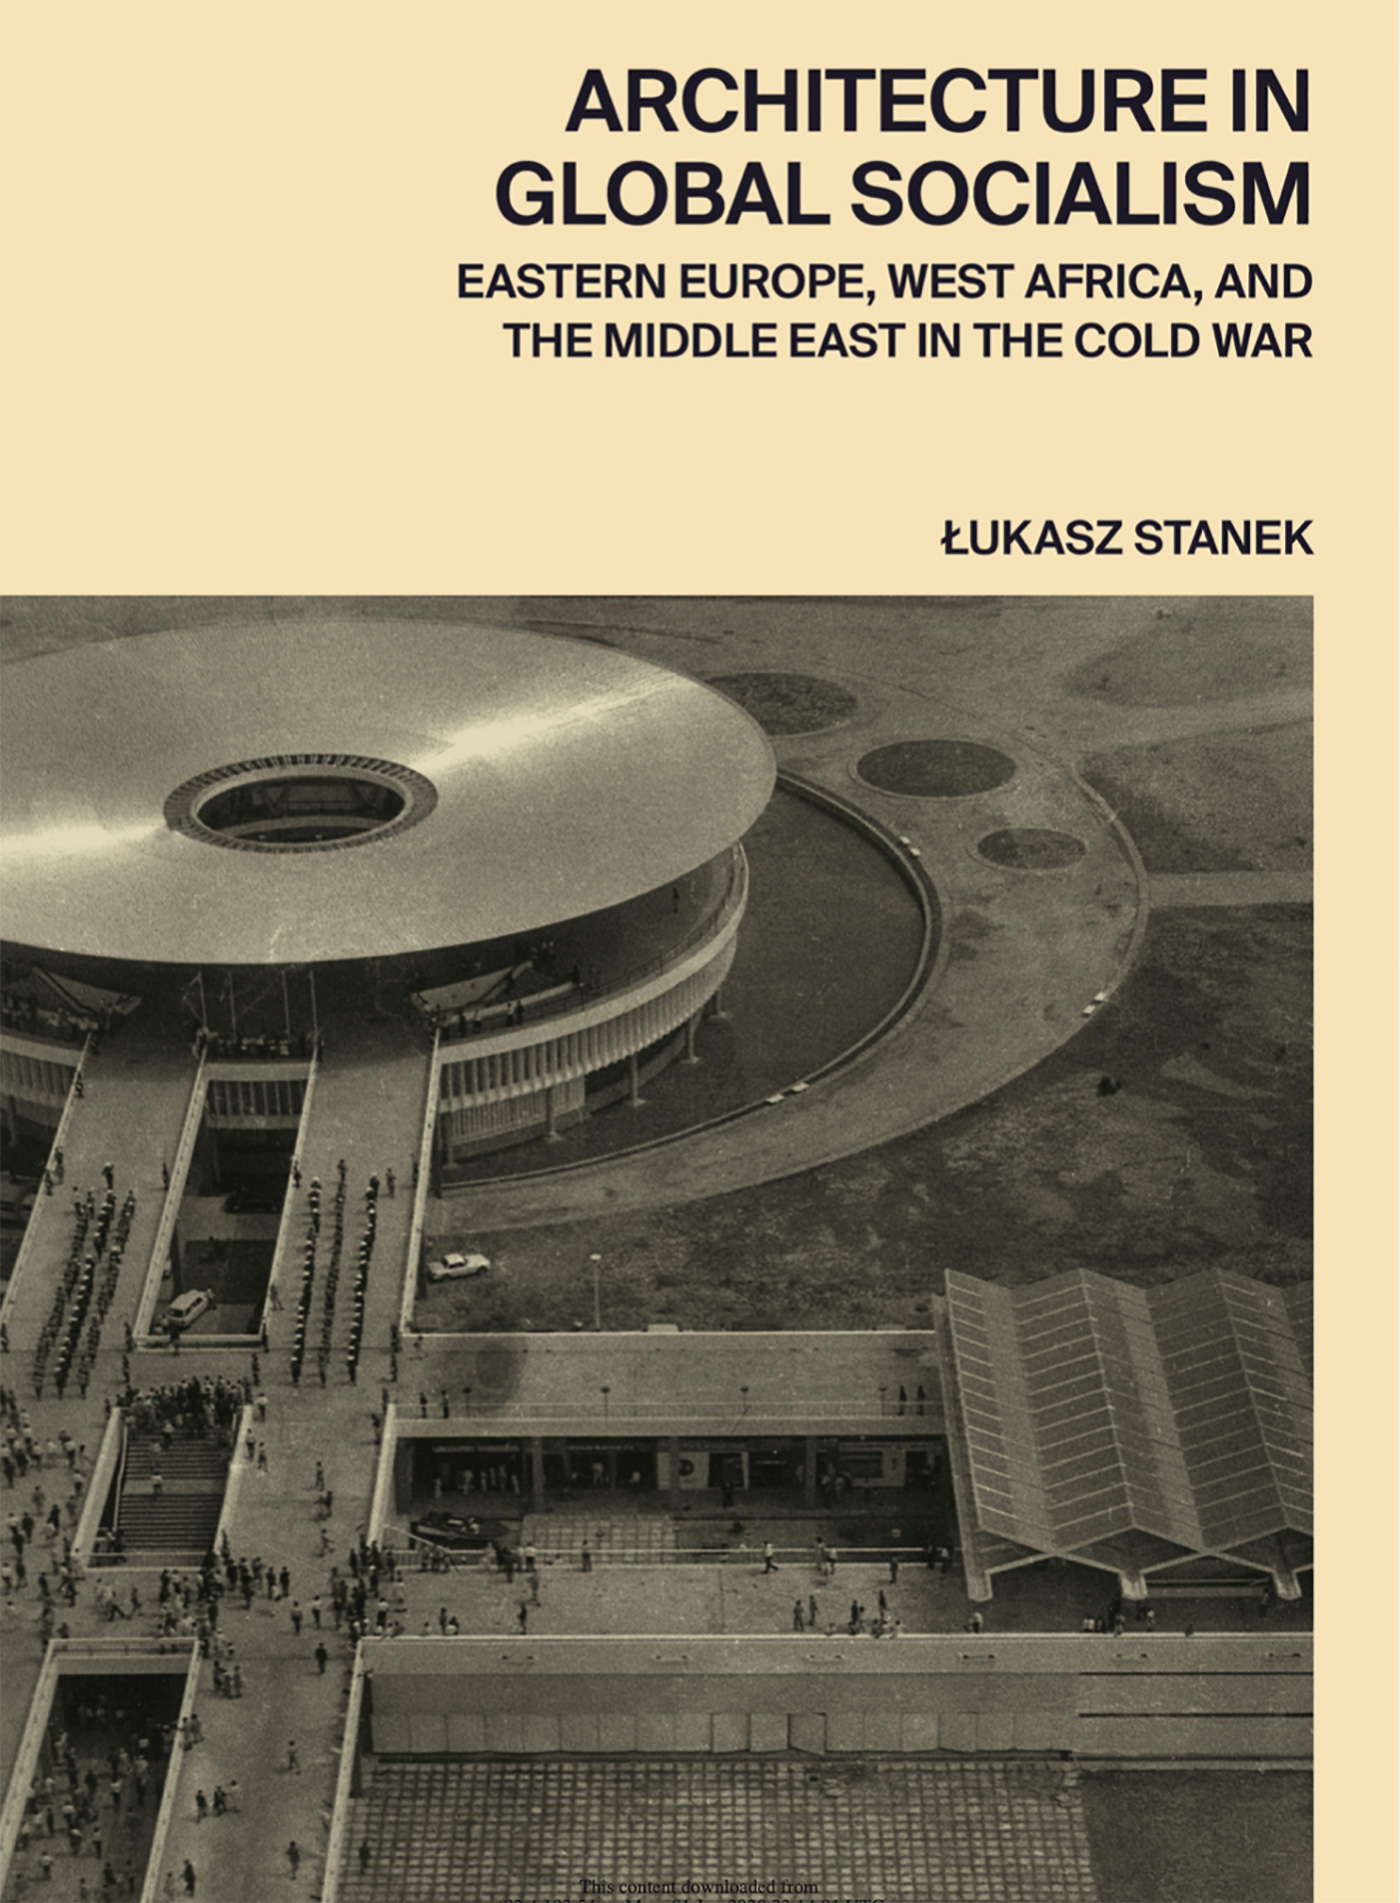 Rewriting the History of Shaping Landscapes in the Global South: The Role of Eastern European Professionals